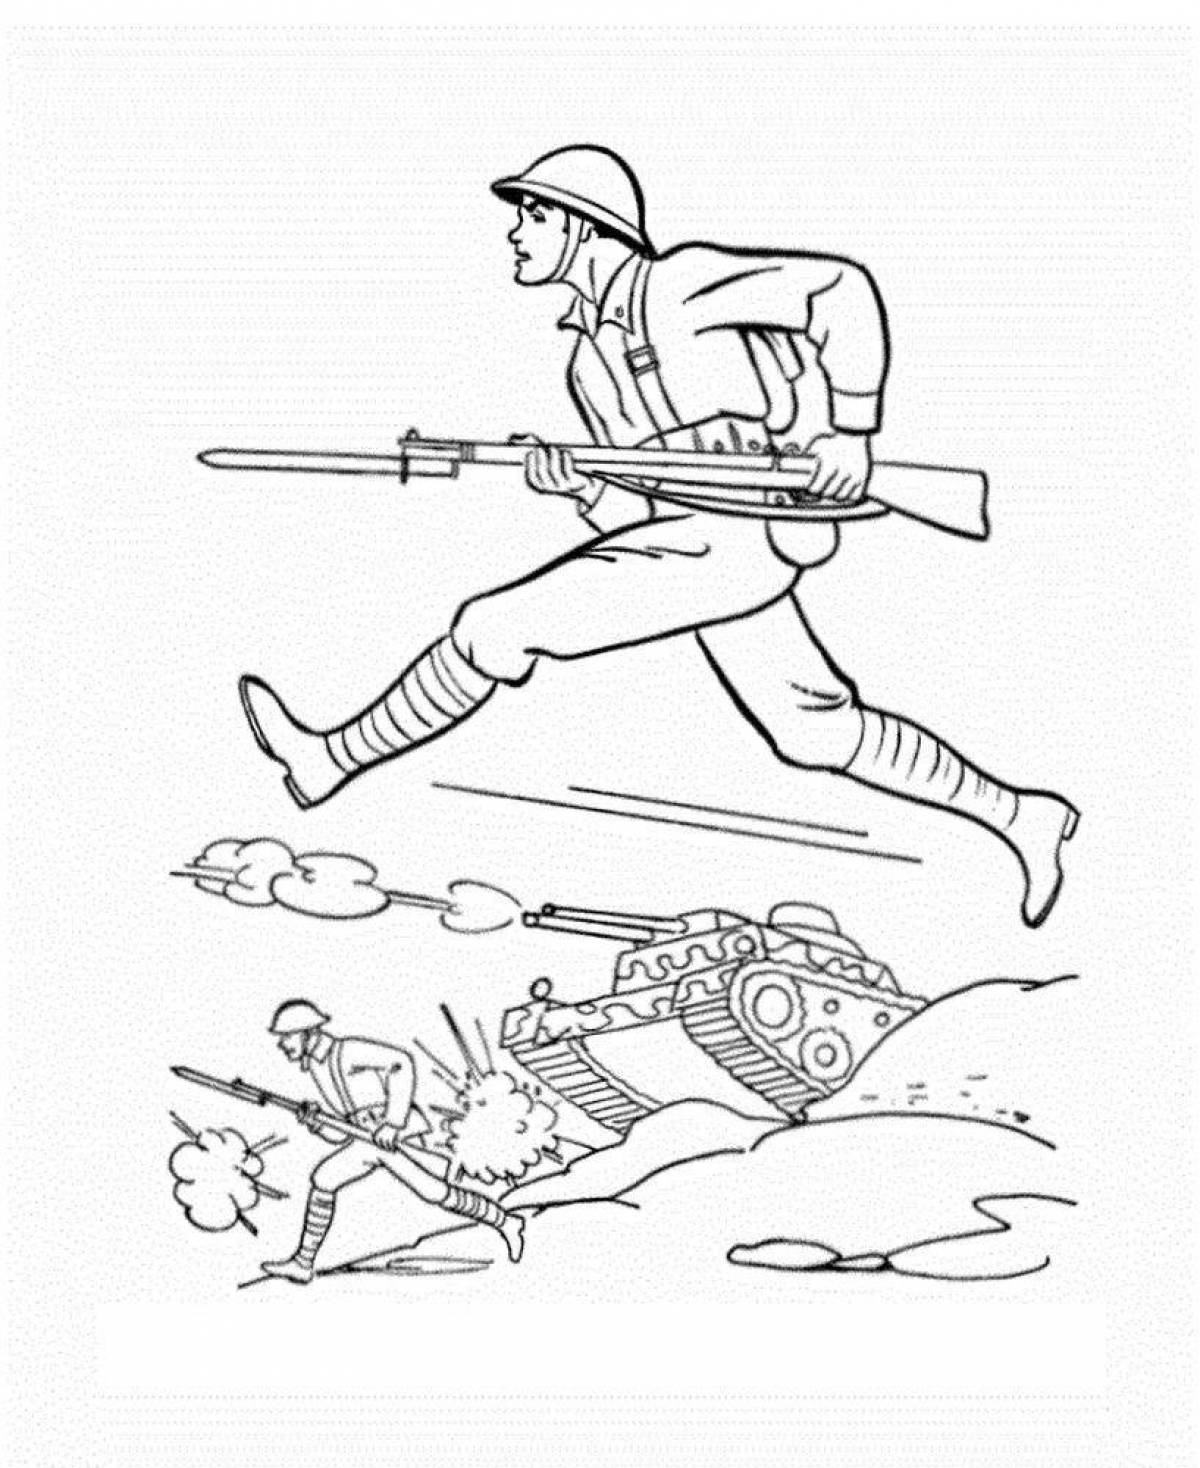 Colourful children's war coloring book